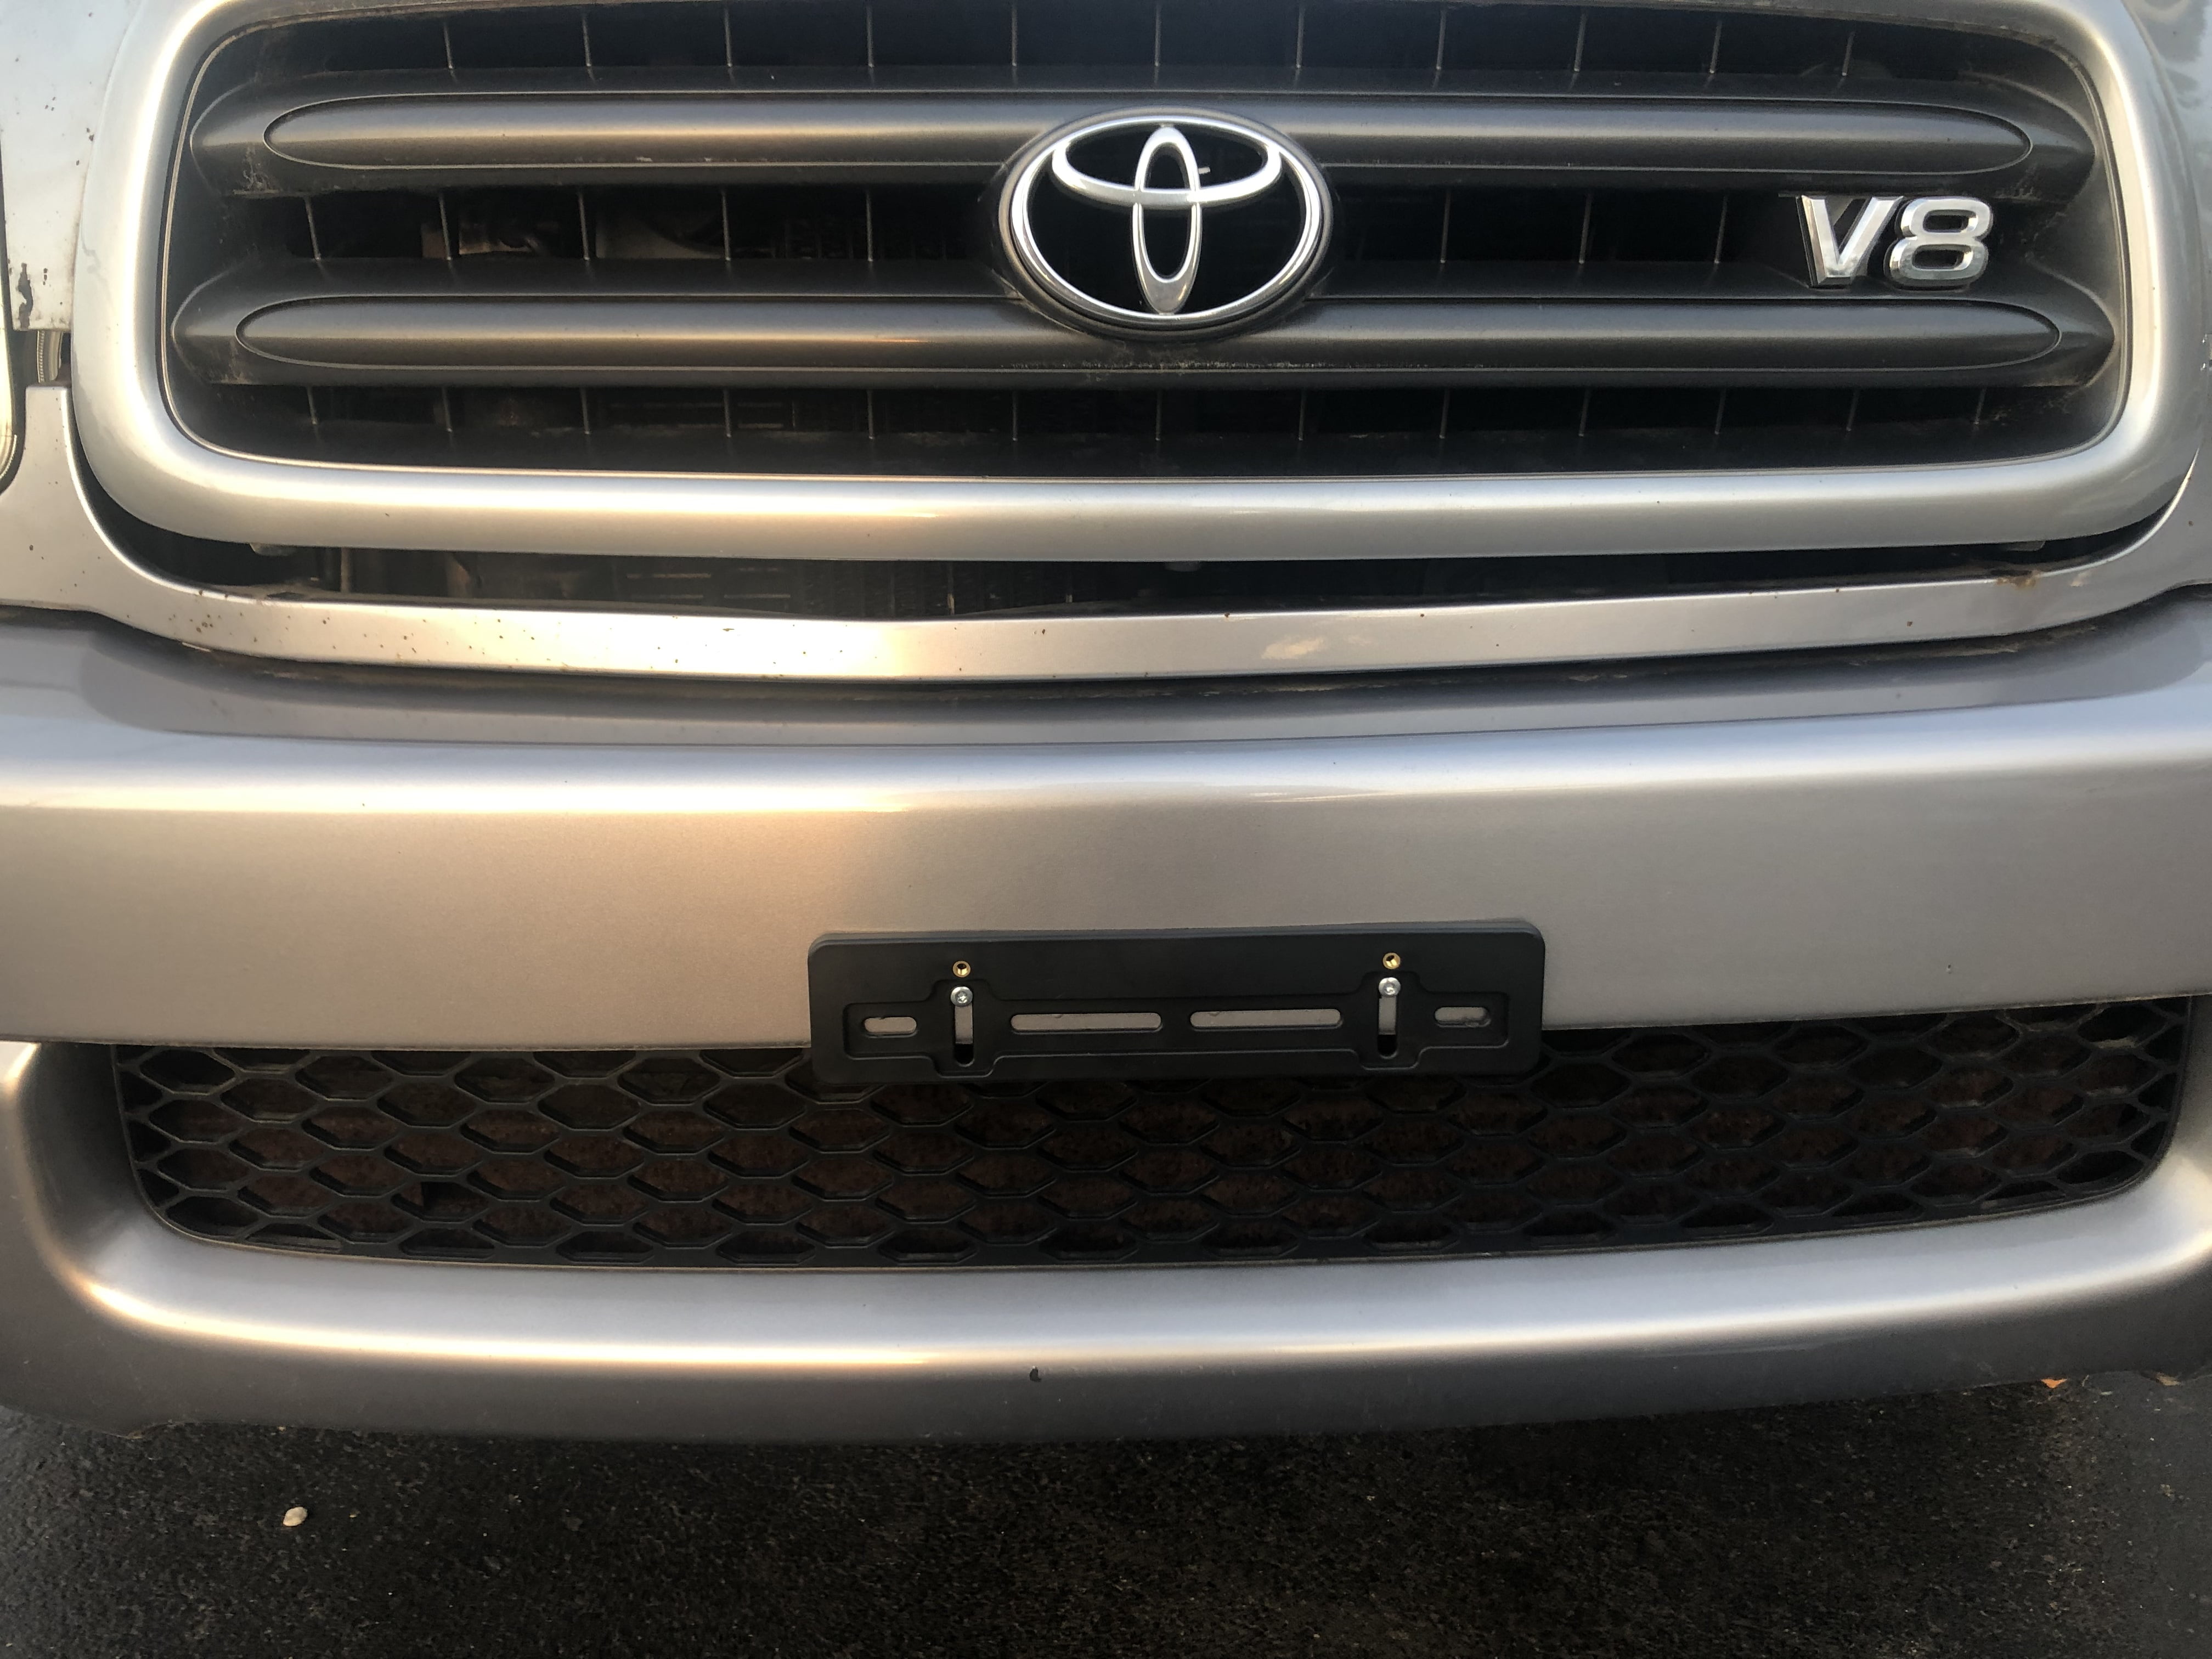 Brand New Replacement Toyota Tundra License Plate Frame In Black 